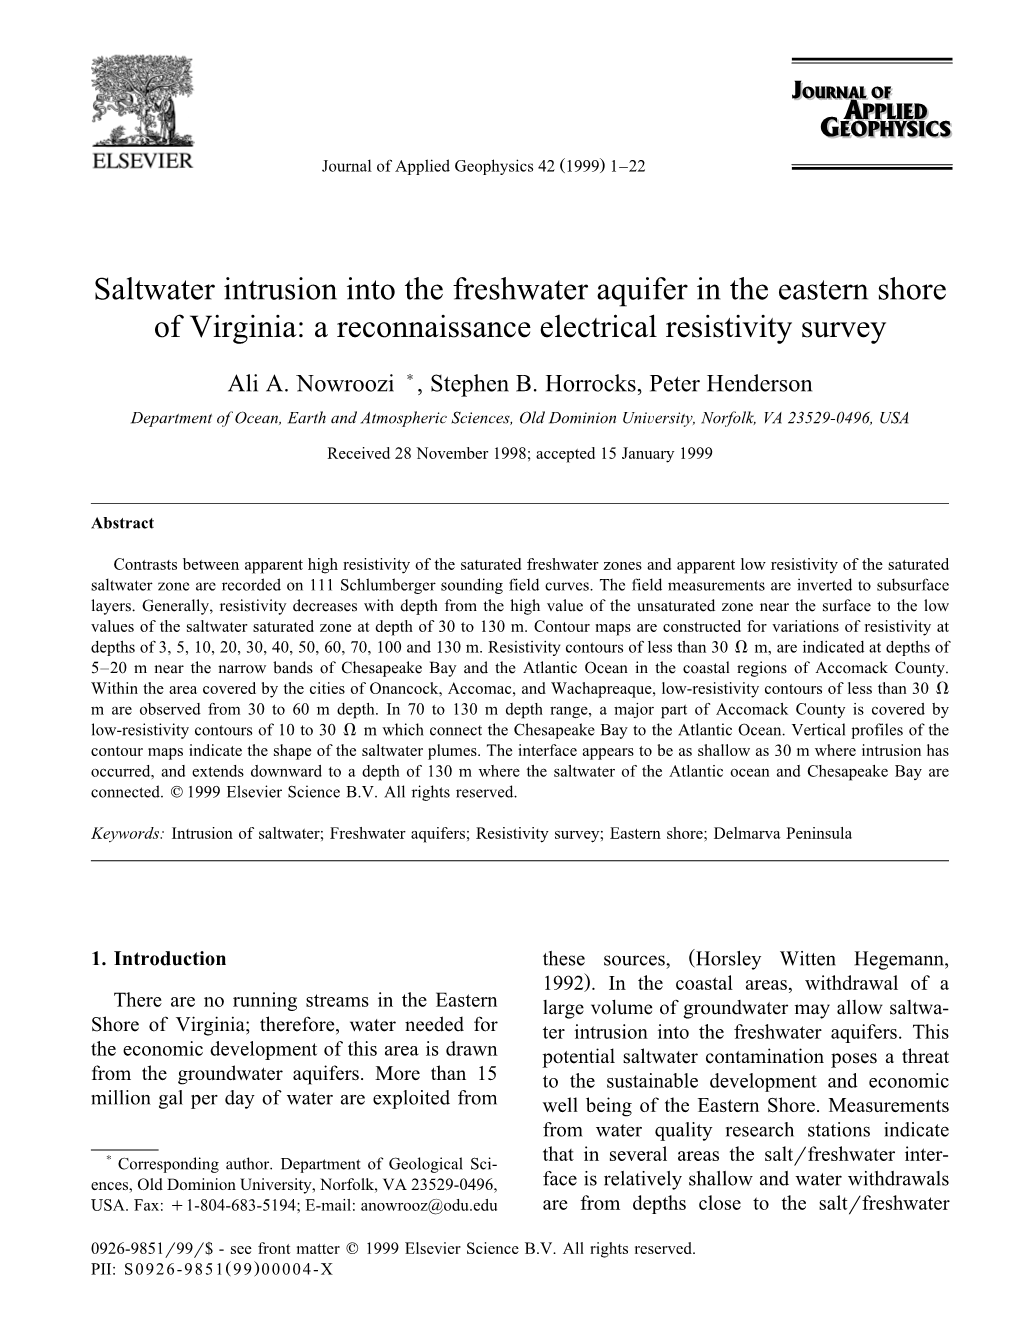 Saltwater Intrusion Into the Freshwater Aquifer in the Eastern Shore of Virginia: a Reconnaissance Electrical Resistivity Survey